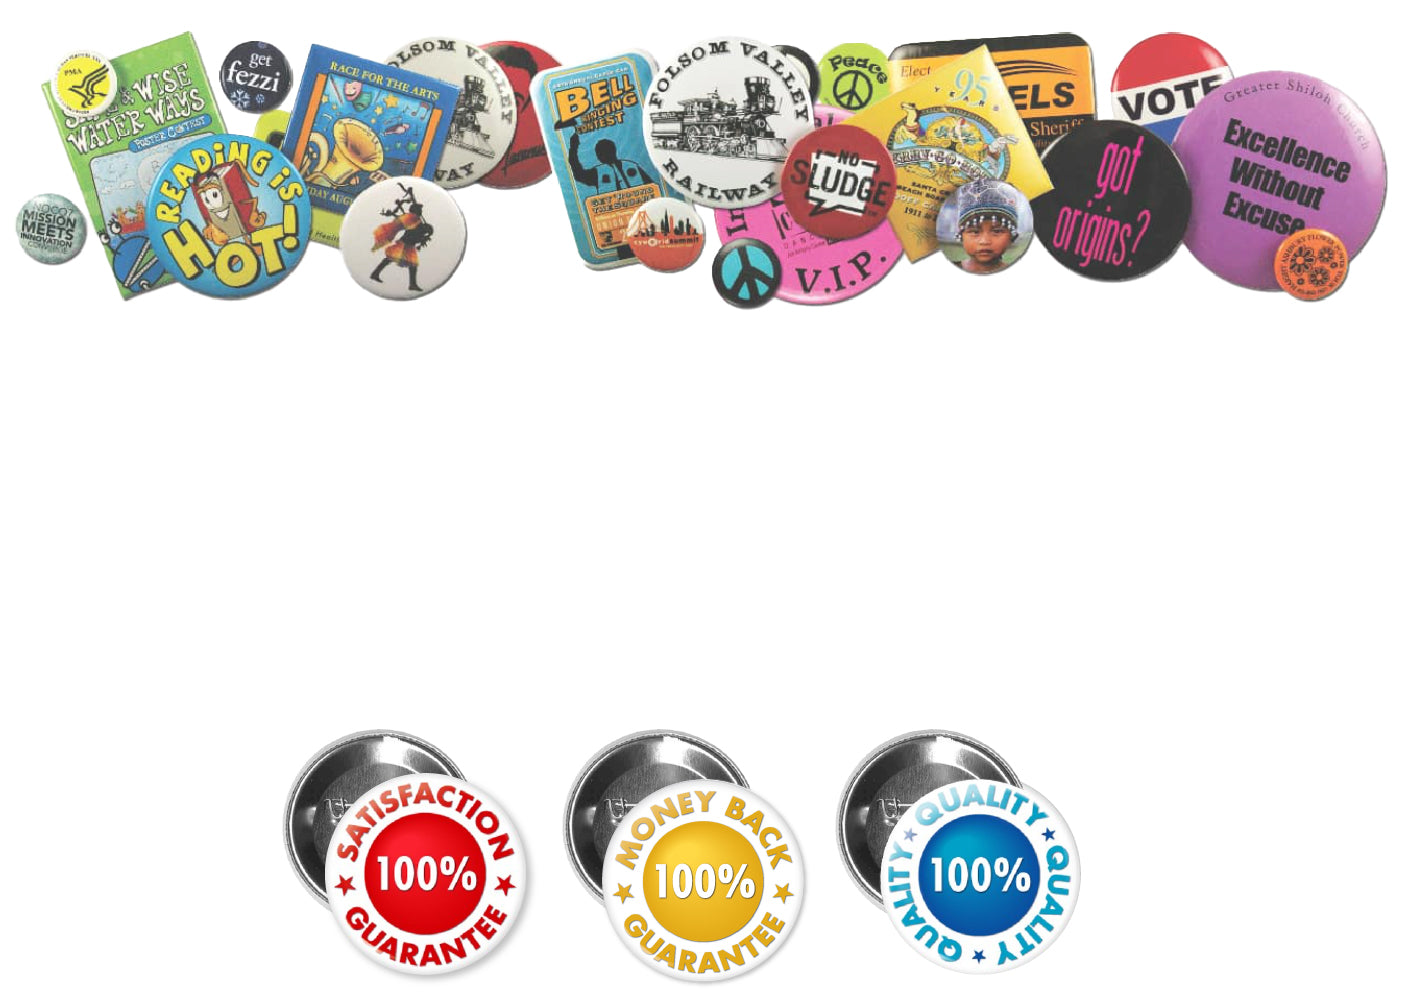 1 Round Custom Printed Button Magnets - Just Buttons